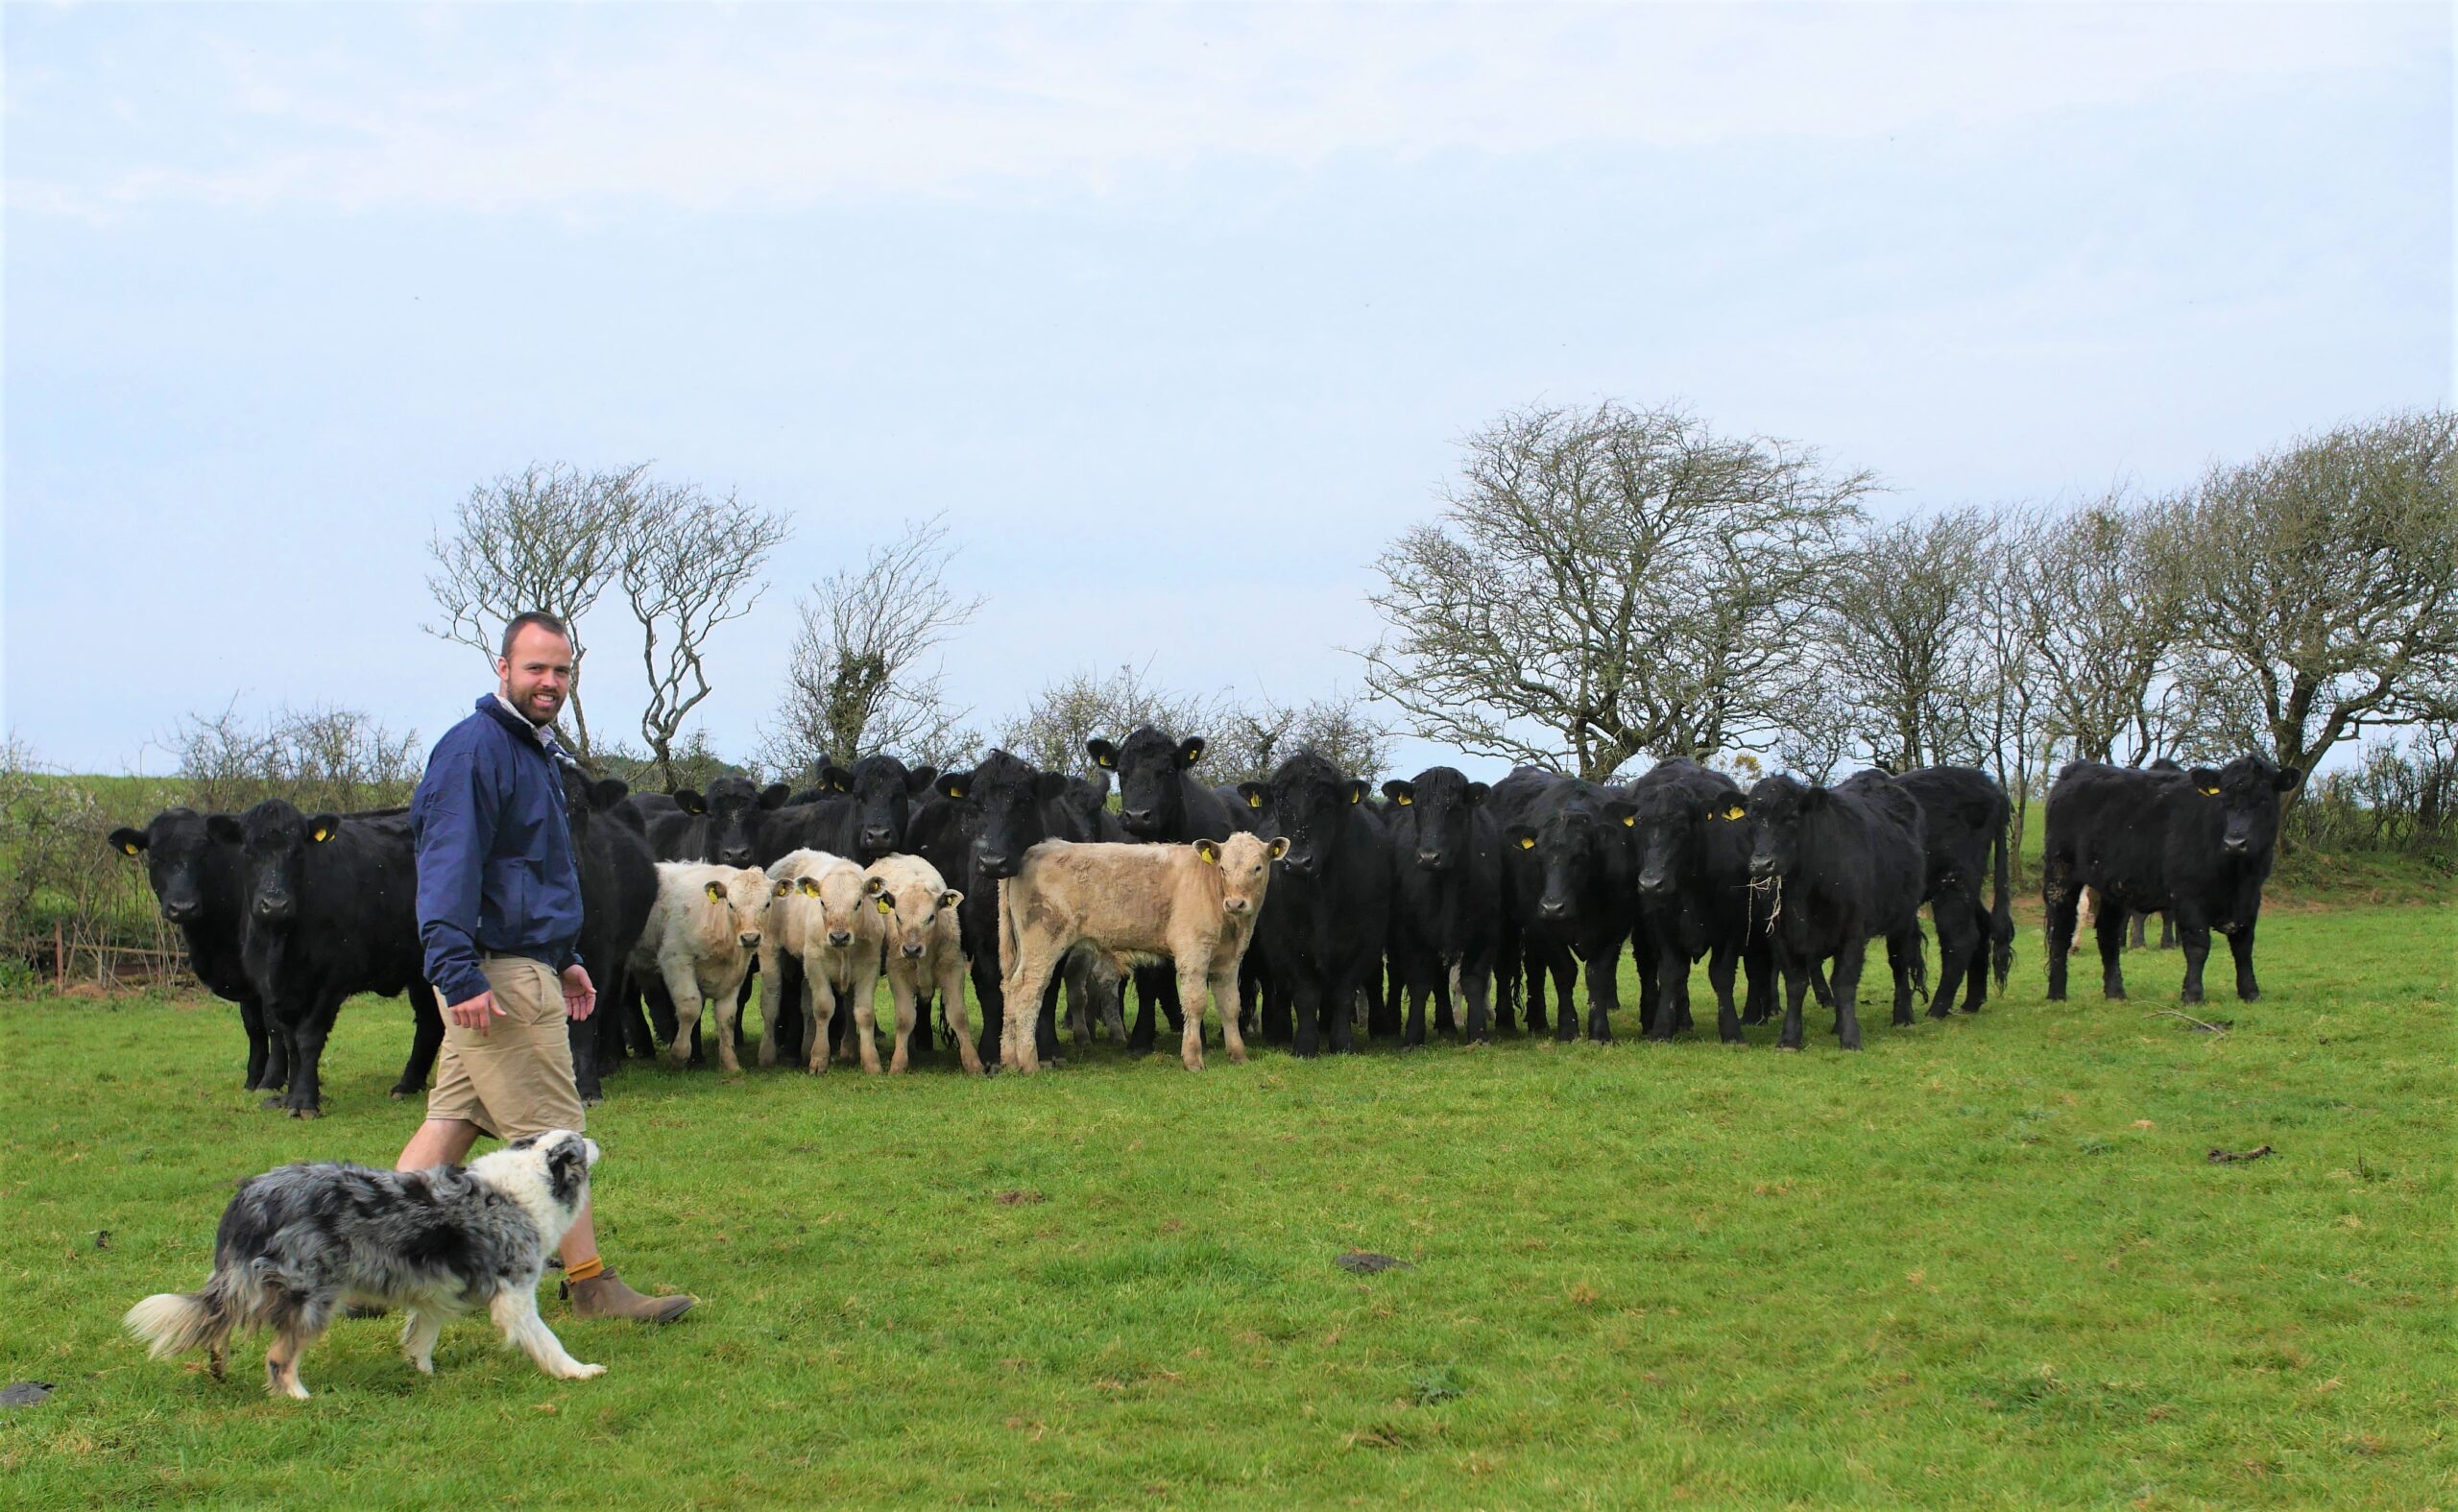 dave with his dog and cattle in the background